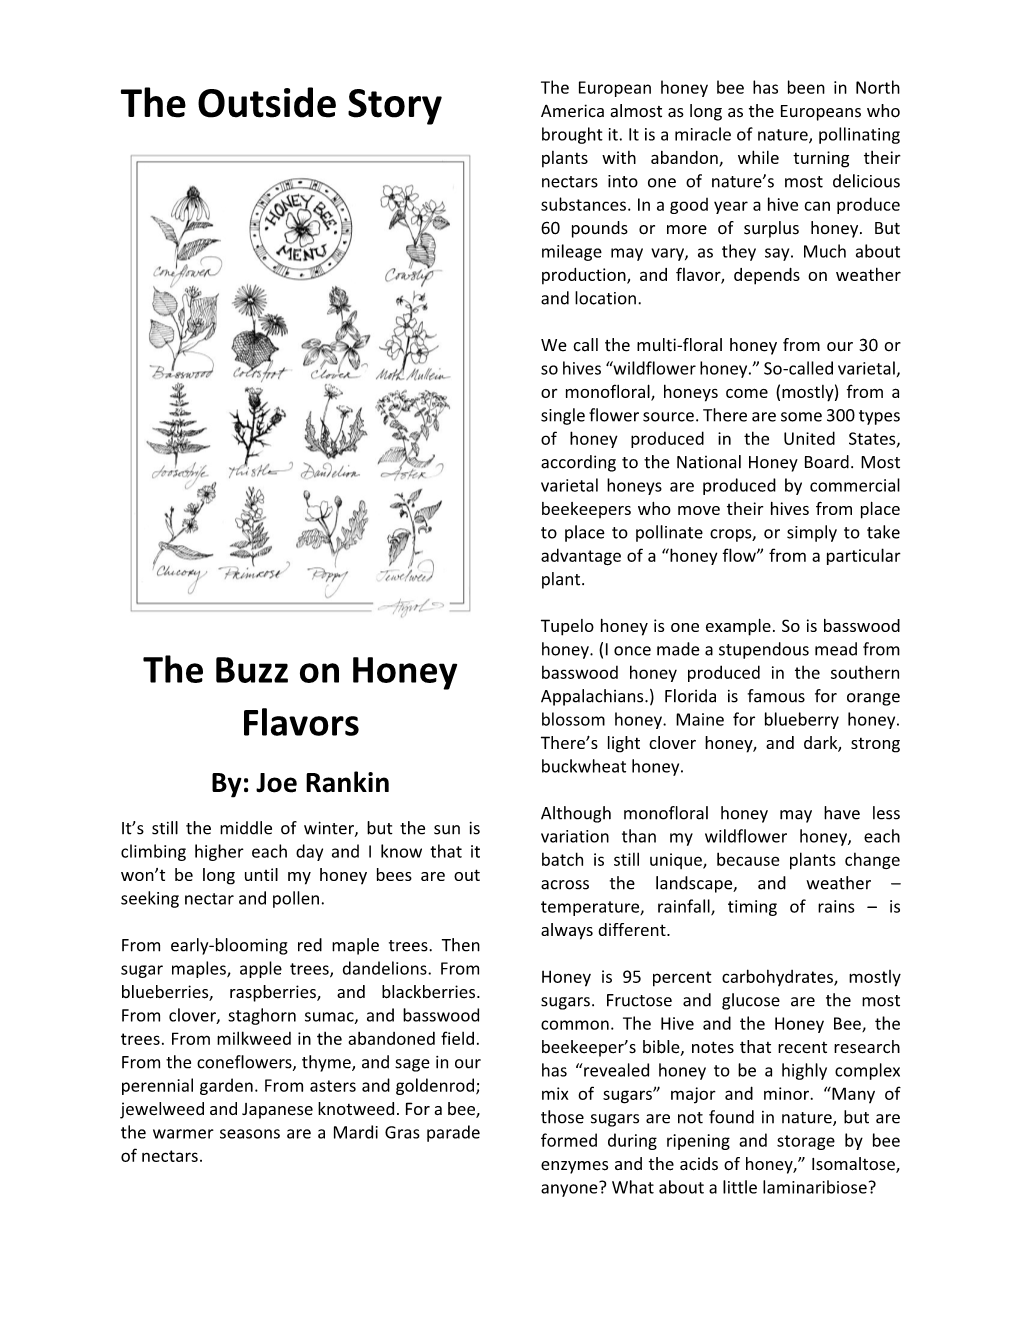 The Buzz on Honey Flavors